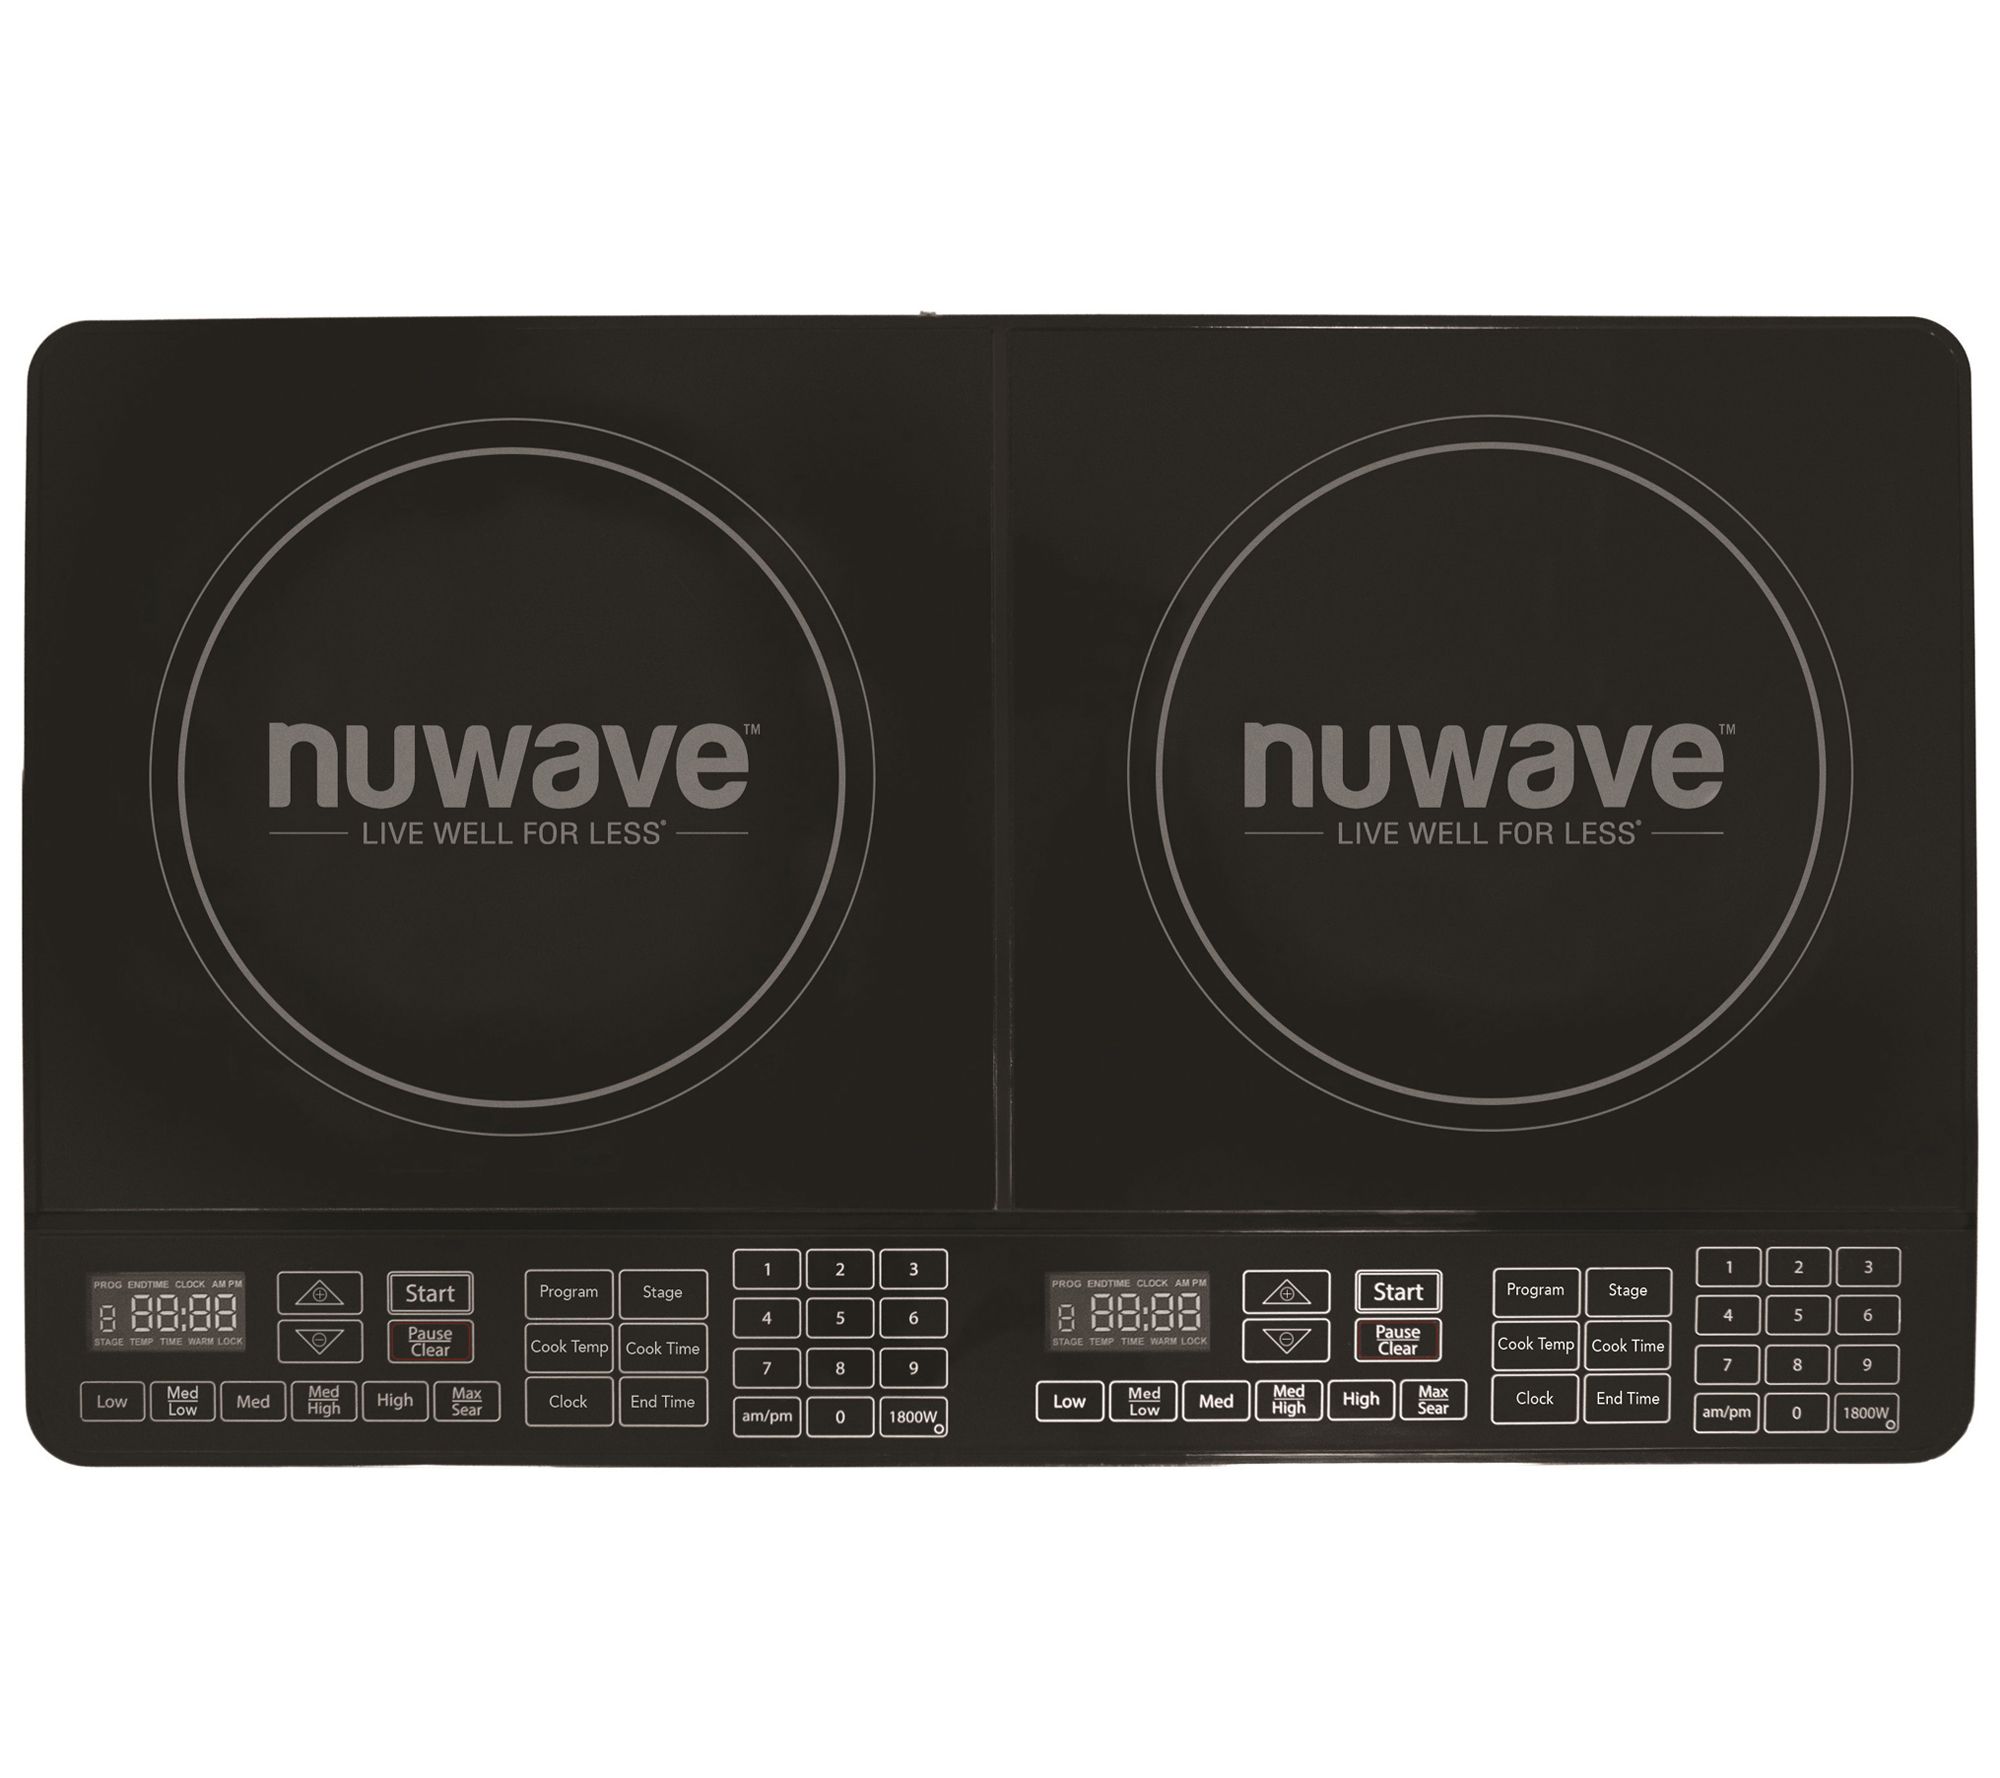 NuWave Pic Flex Precision Induction Cooktop with 9 Black Fry Pan